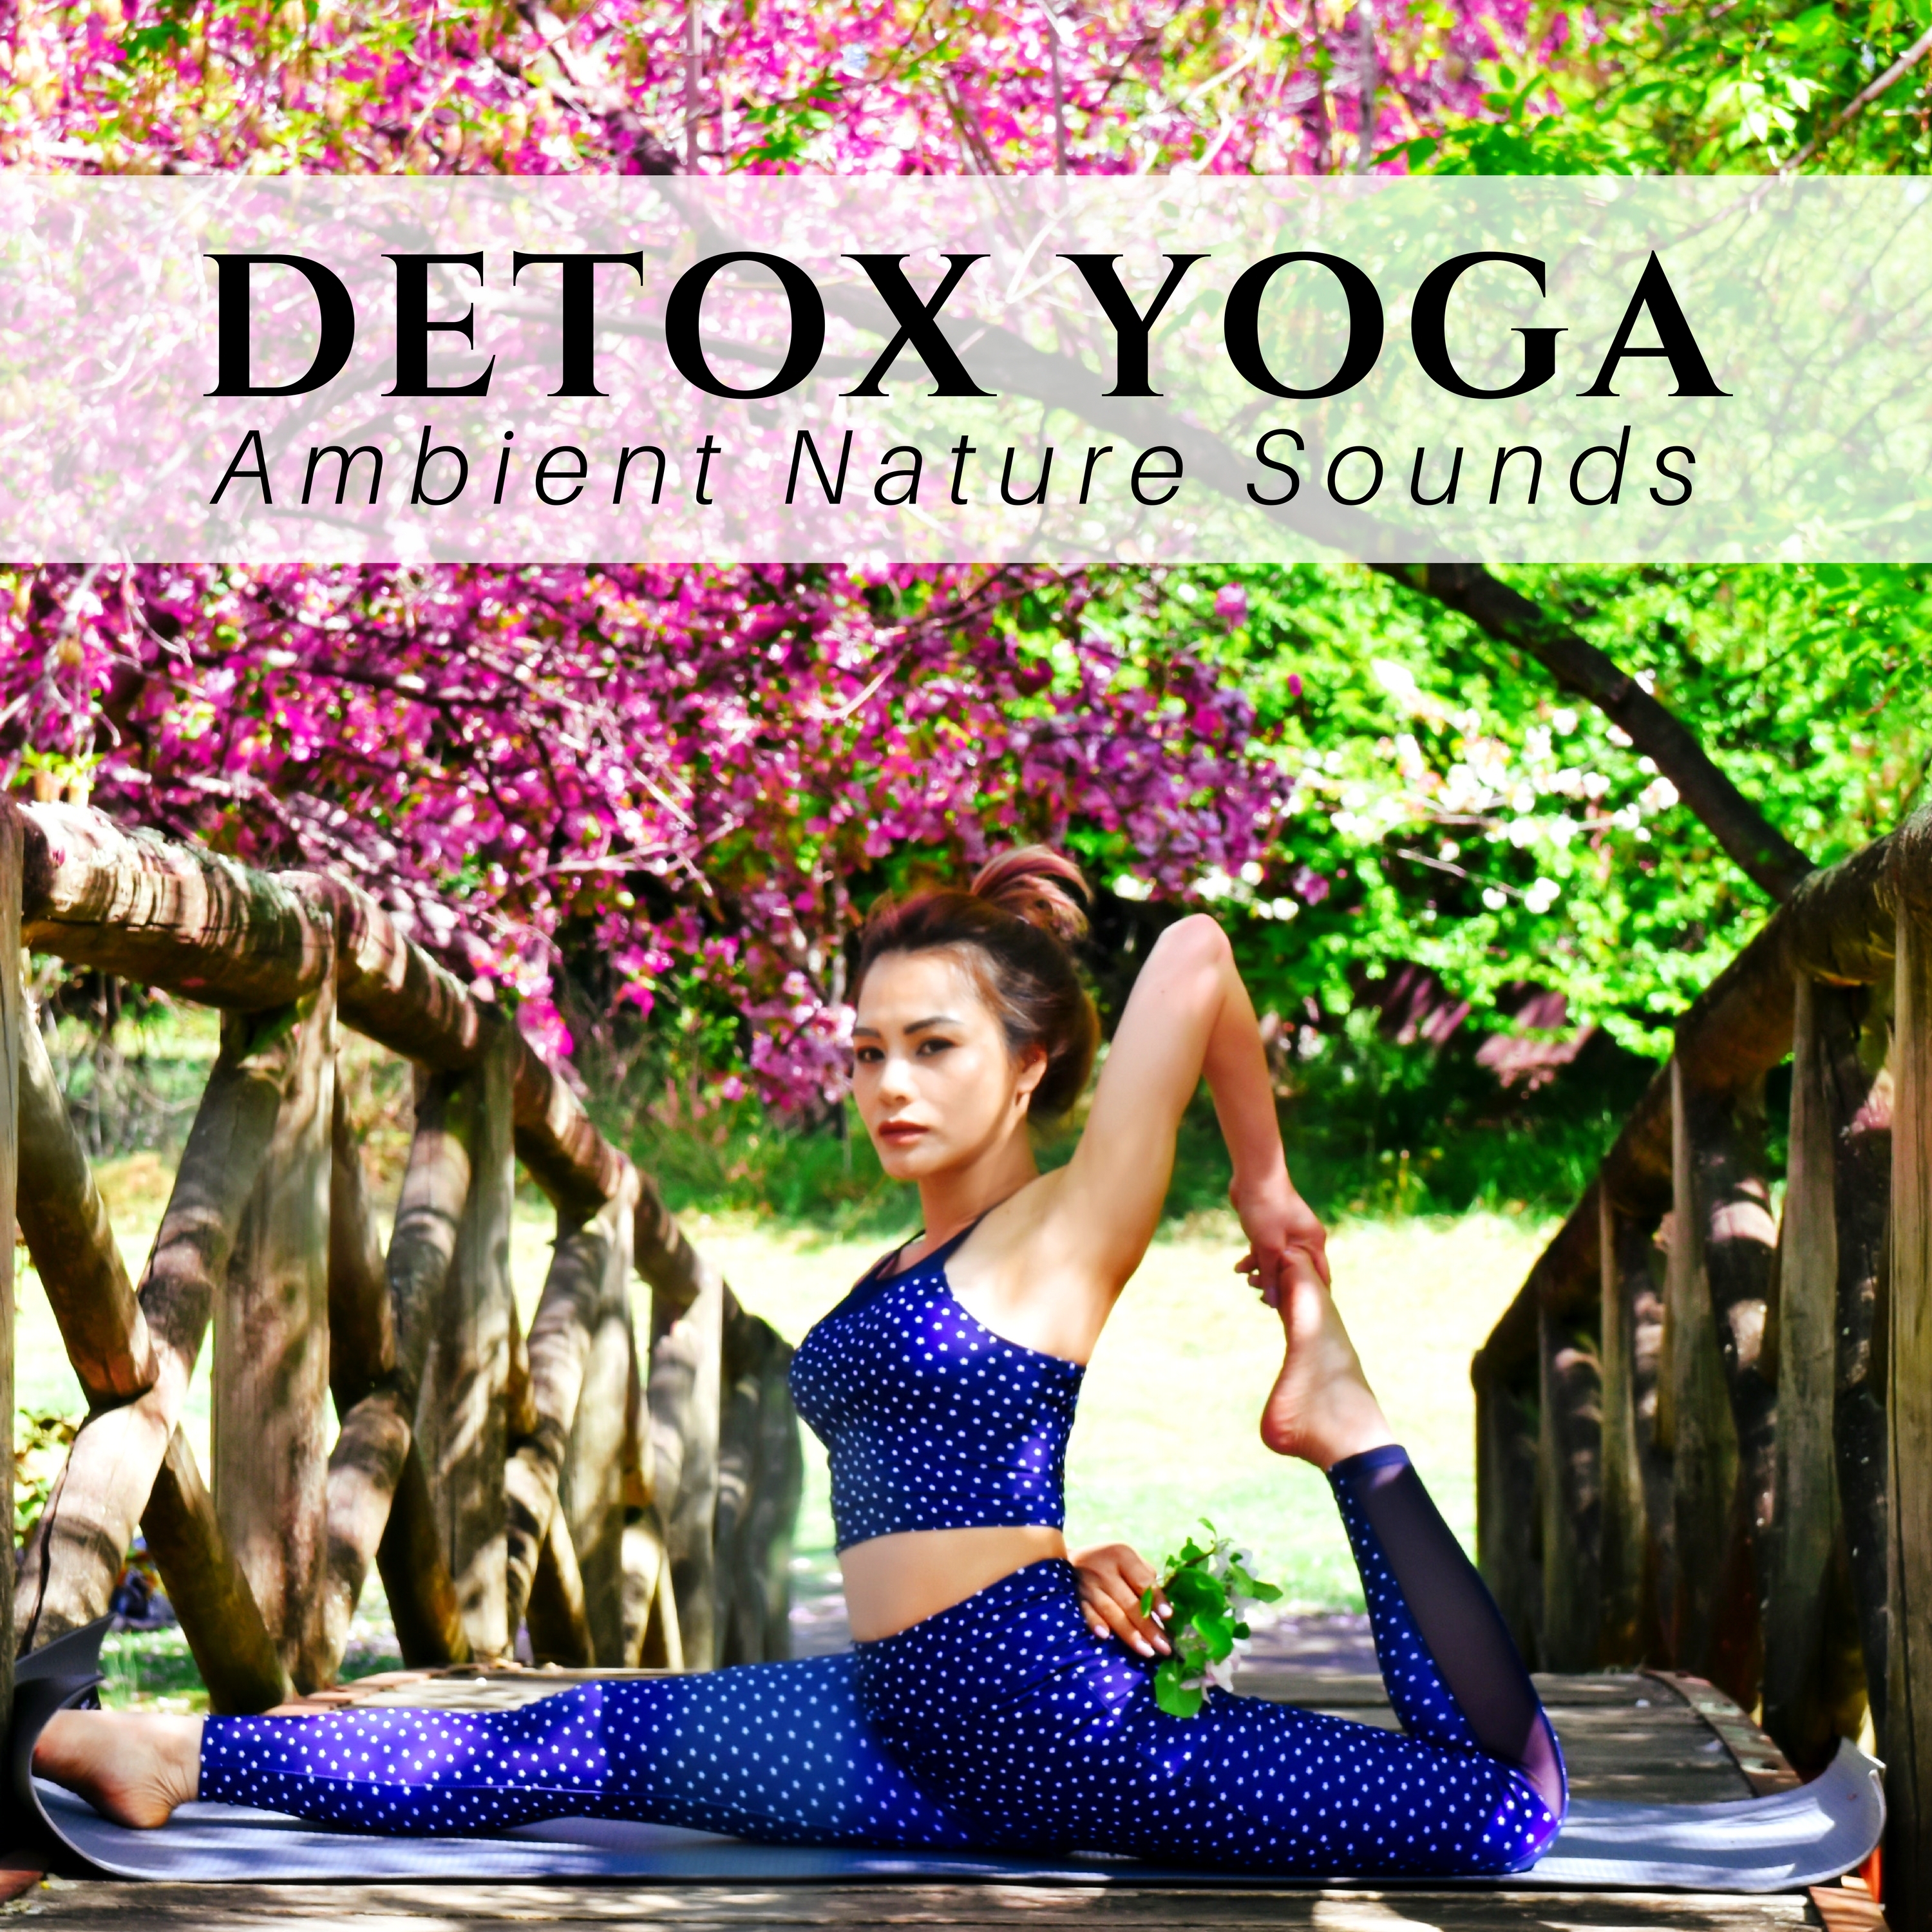 Detox Yoga: Ambient Nature Sounds, New Age Spirituality Music, Meditation Practice